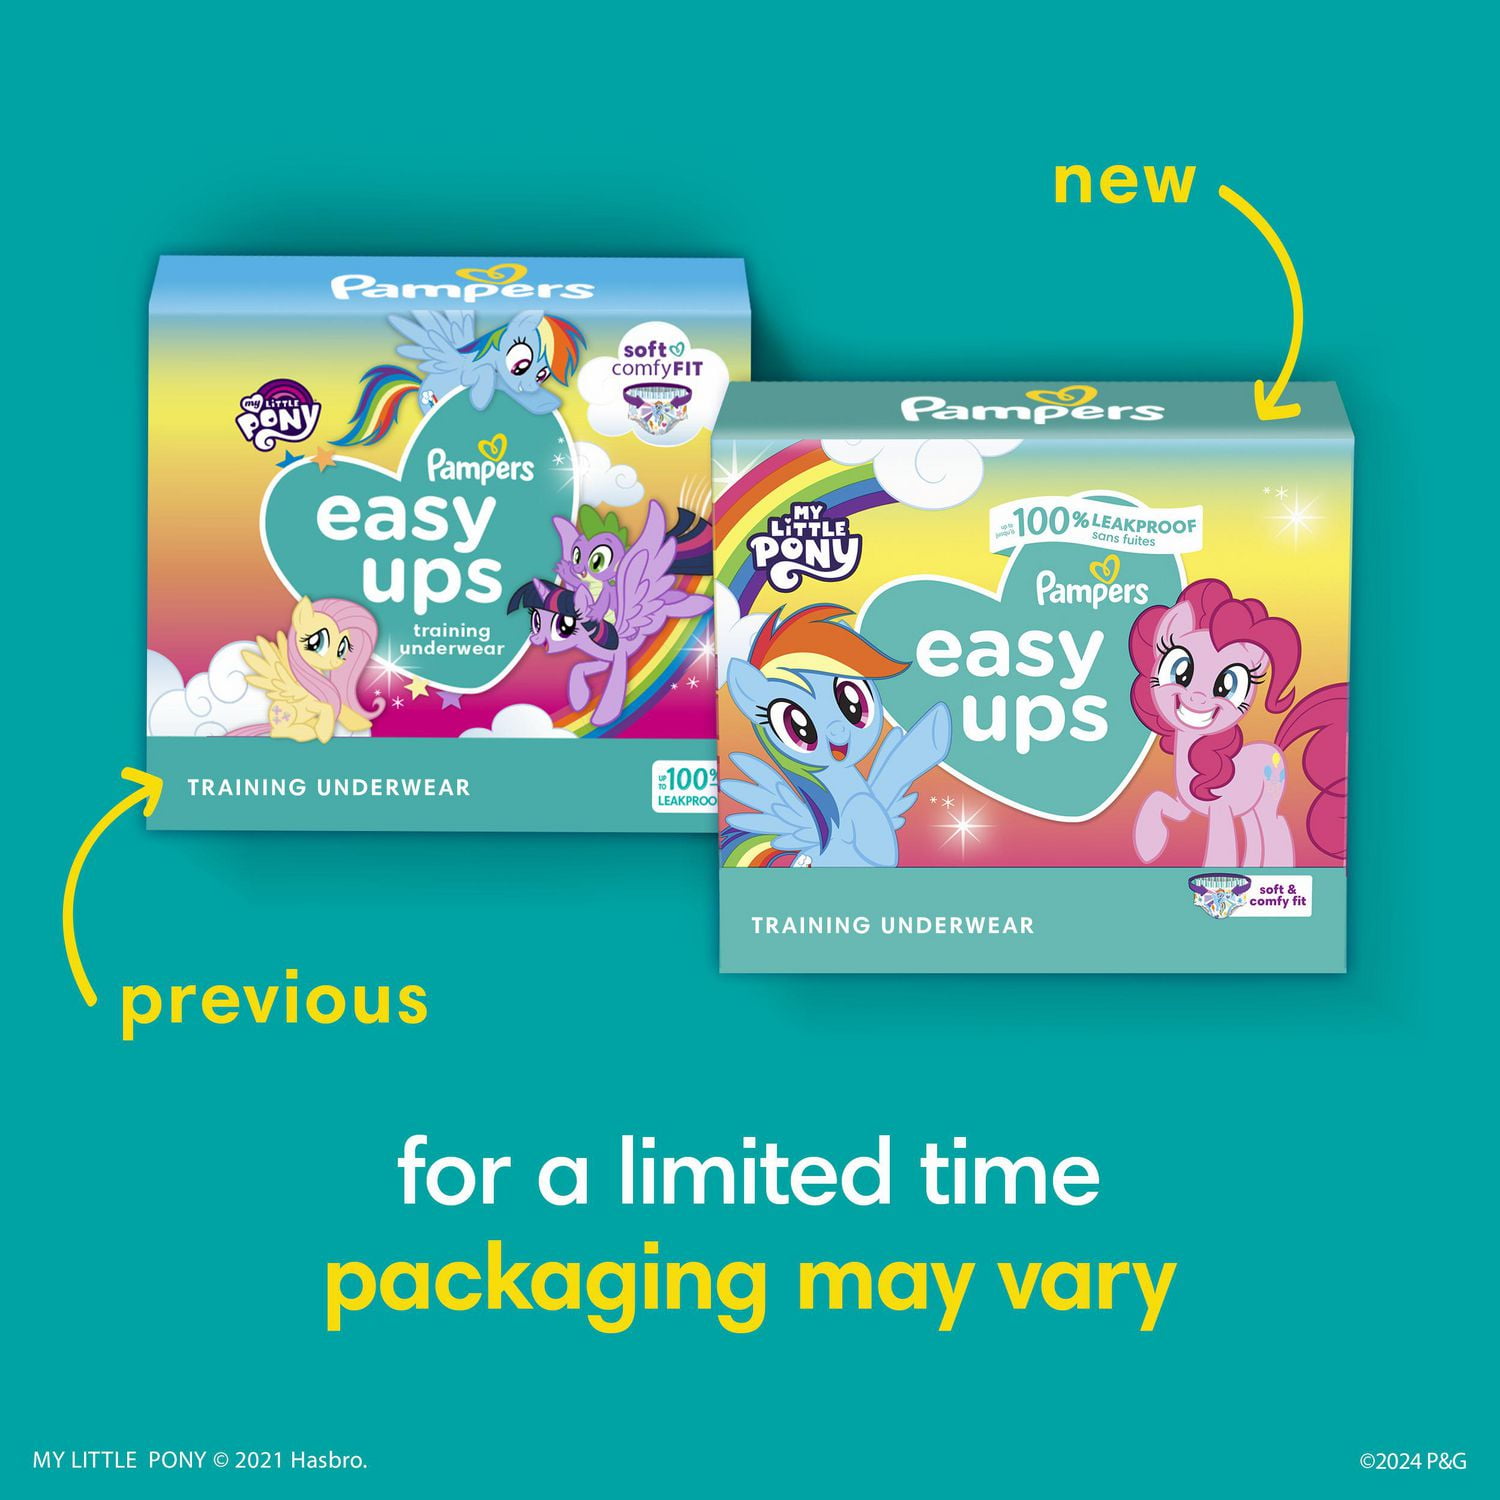 Pampers Easy Ups Pull On Training Pants My Little Pony, 4T-5T, One Month  Supply (104 Count) with Sensitive Water Based Baby Wipes 6X Pop-Top Packs